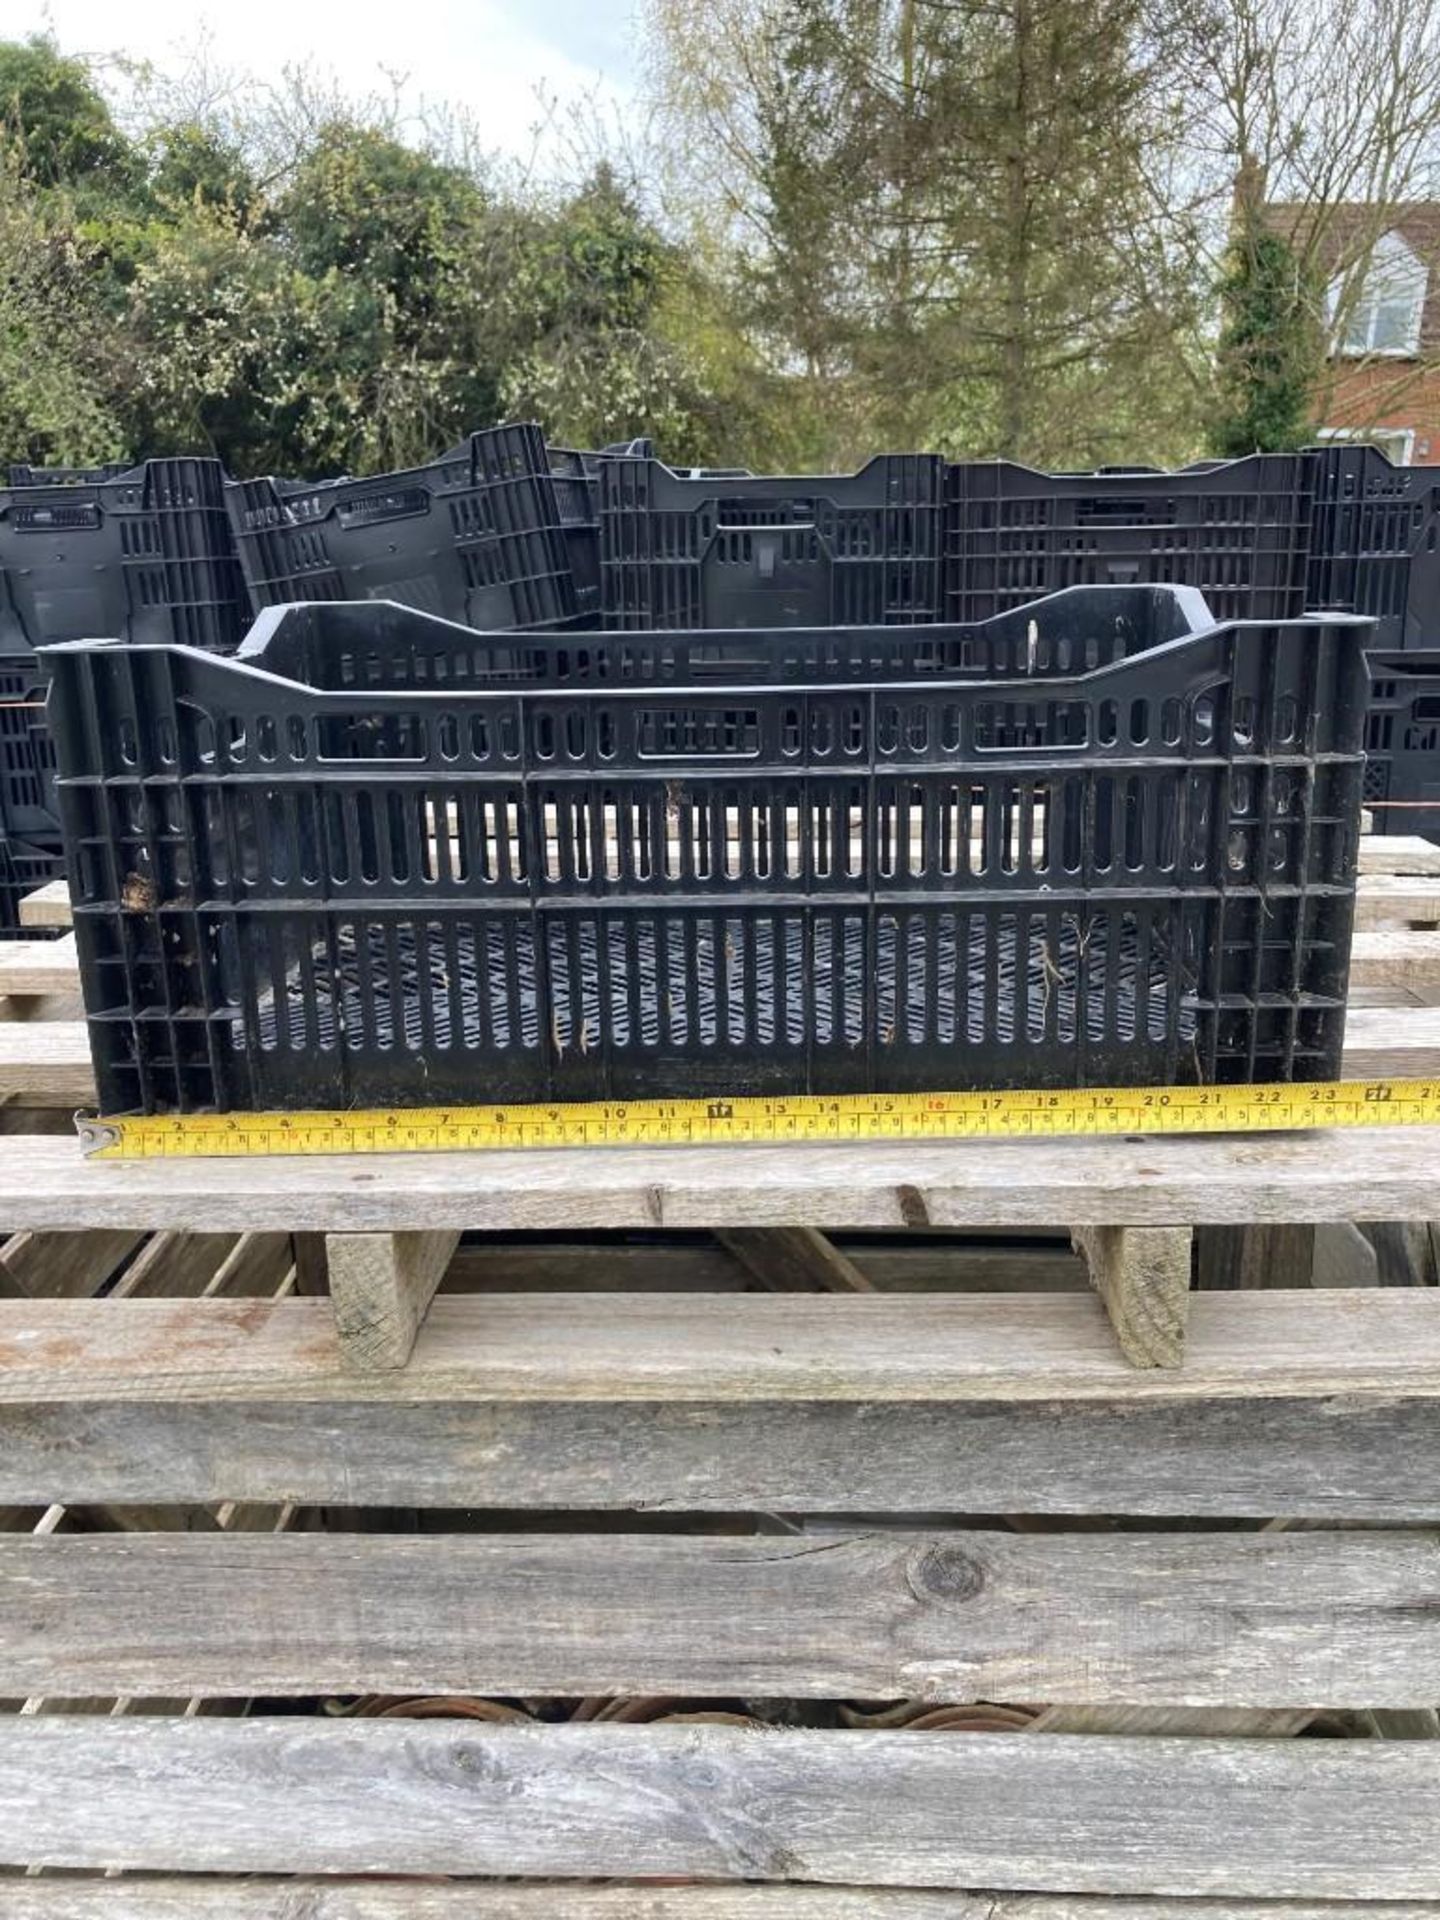 1000 No. Used Black Plastic Lily Crates